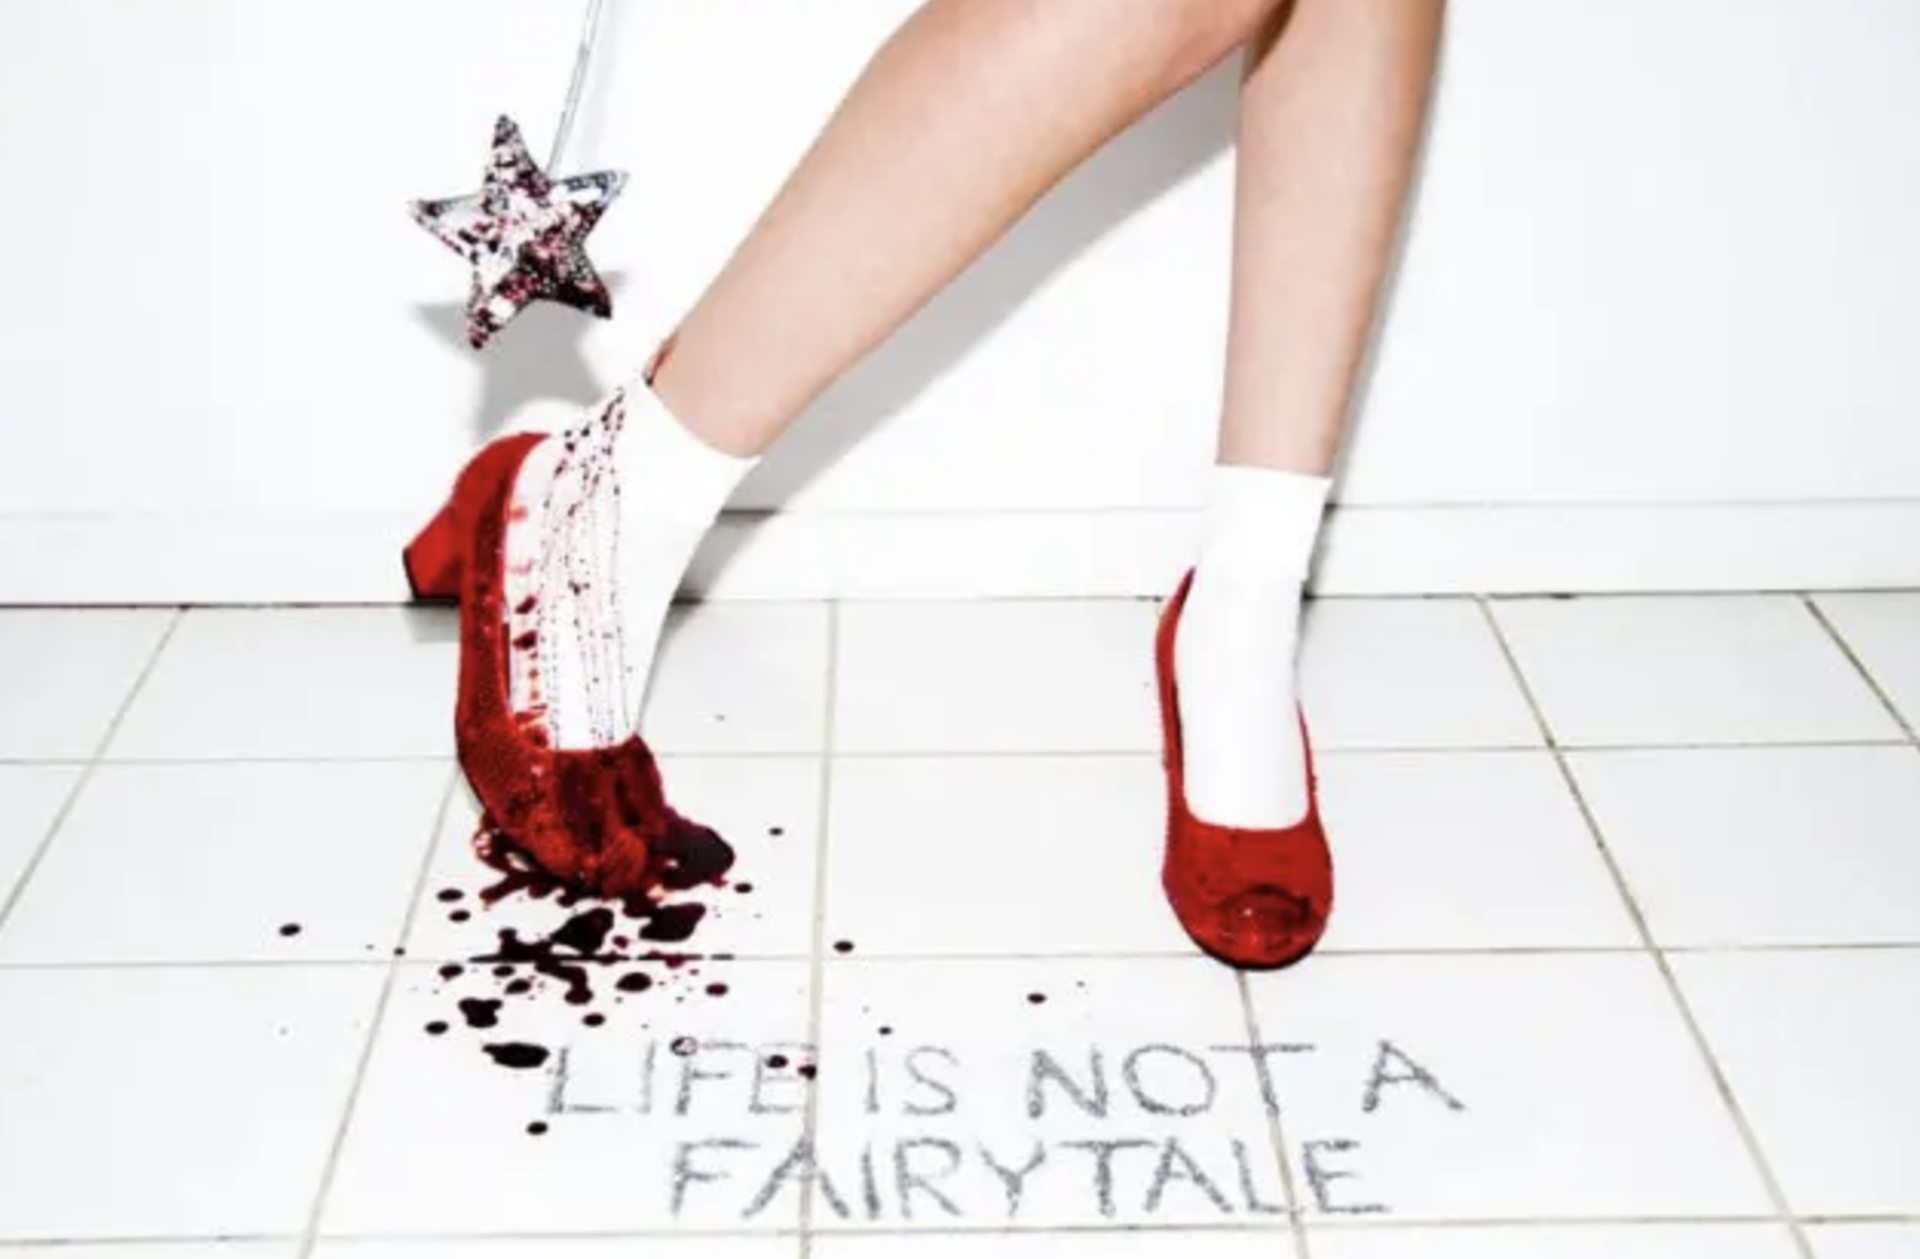 Life Is Not a Fairytale by Tyler Shields